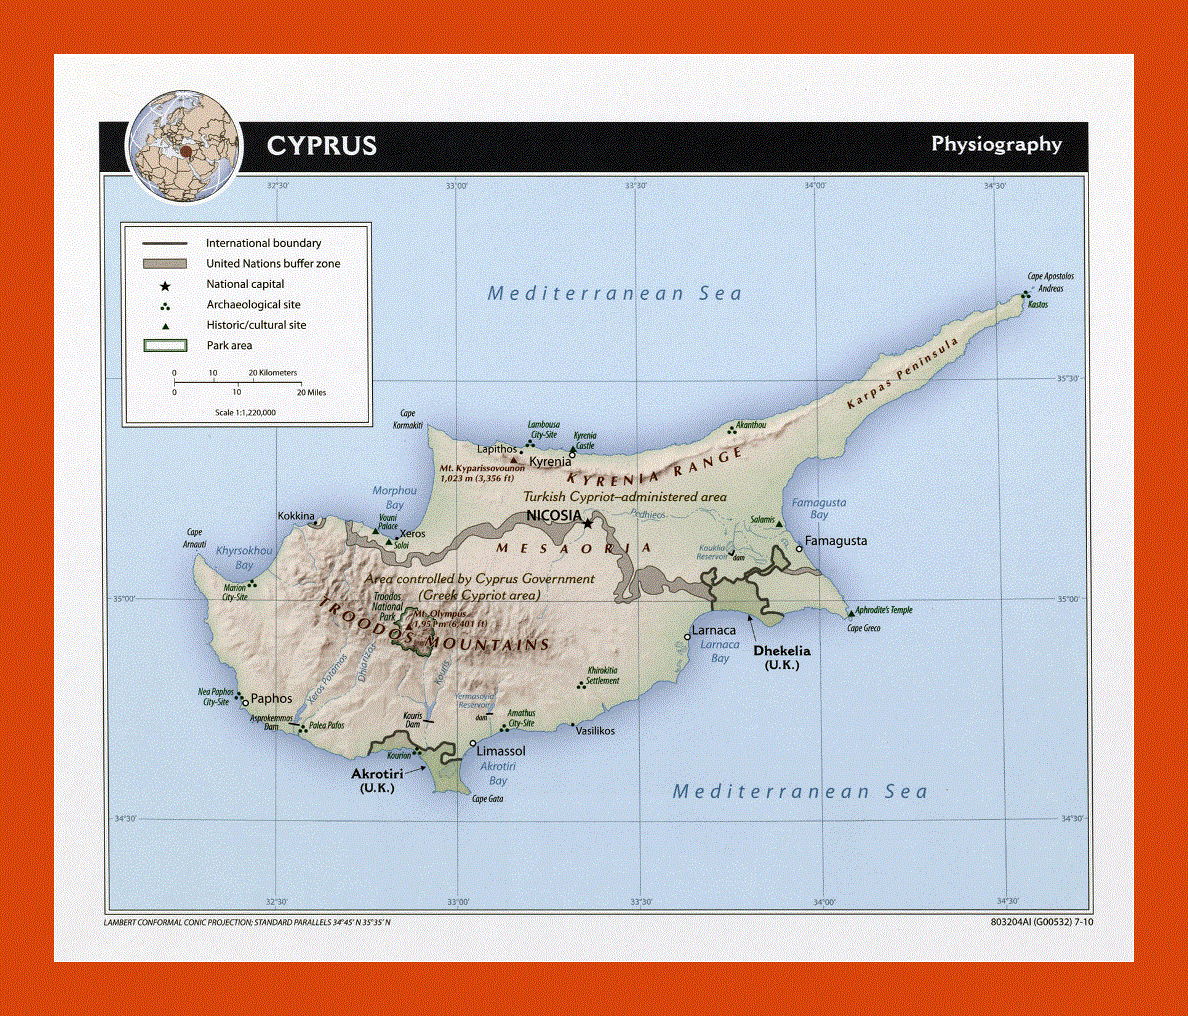 Physiography map of Cyprus - 2010